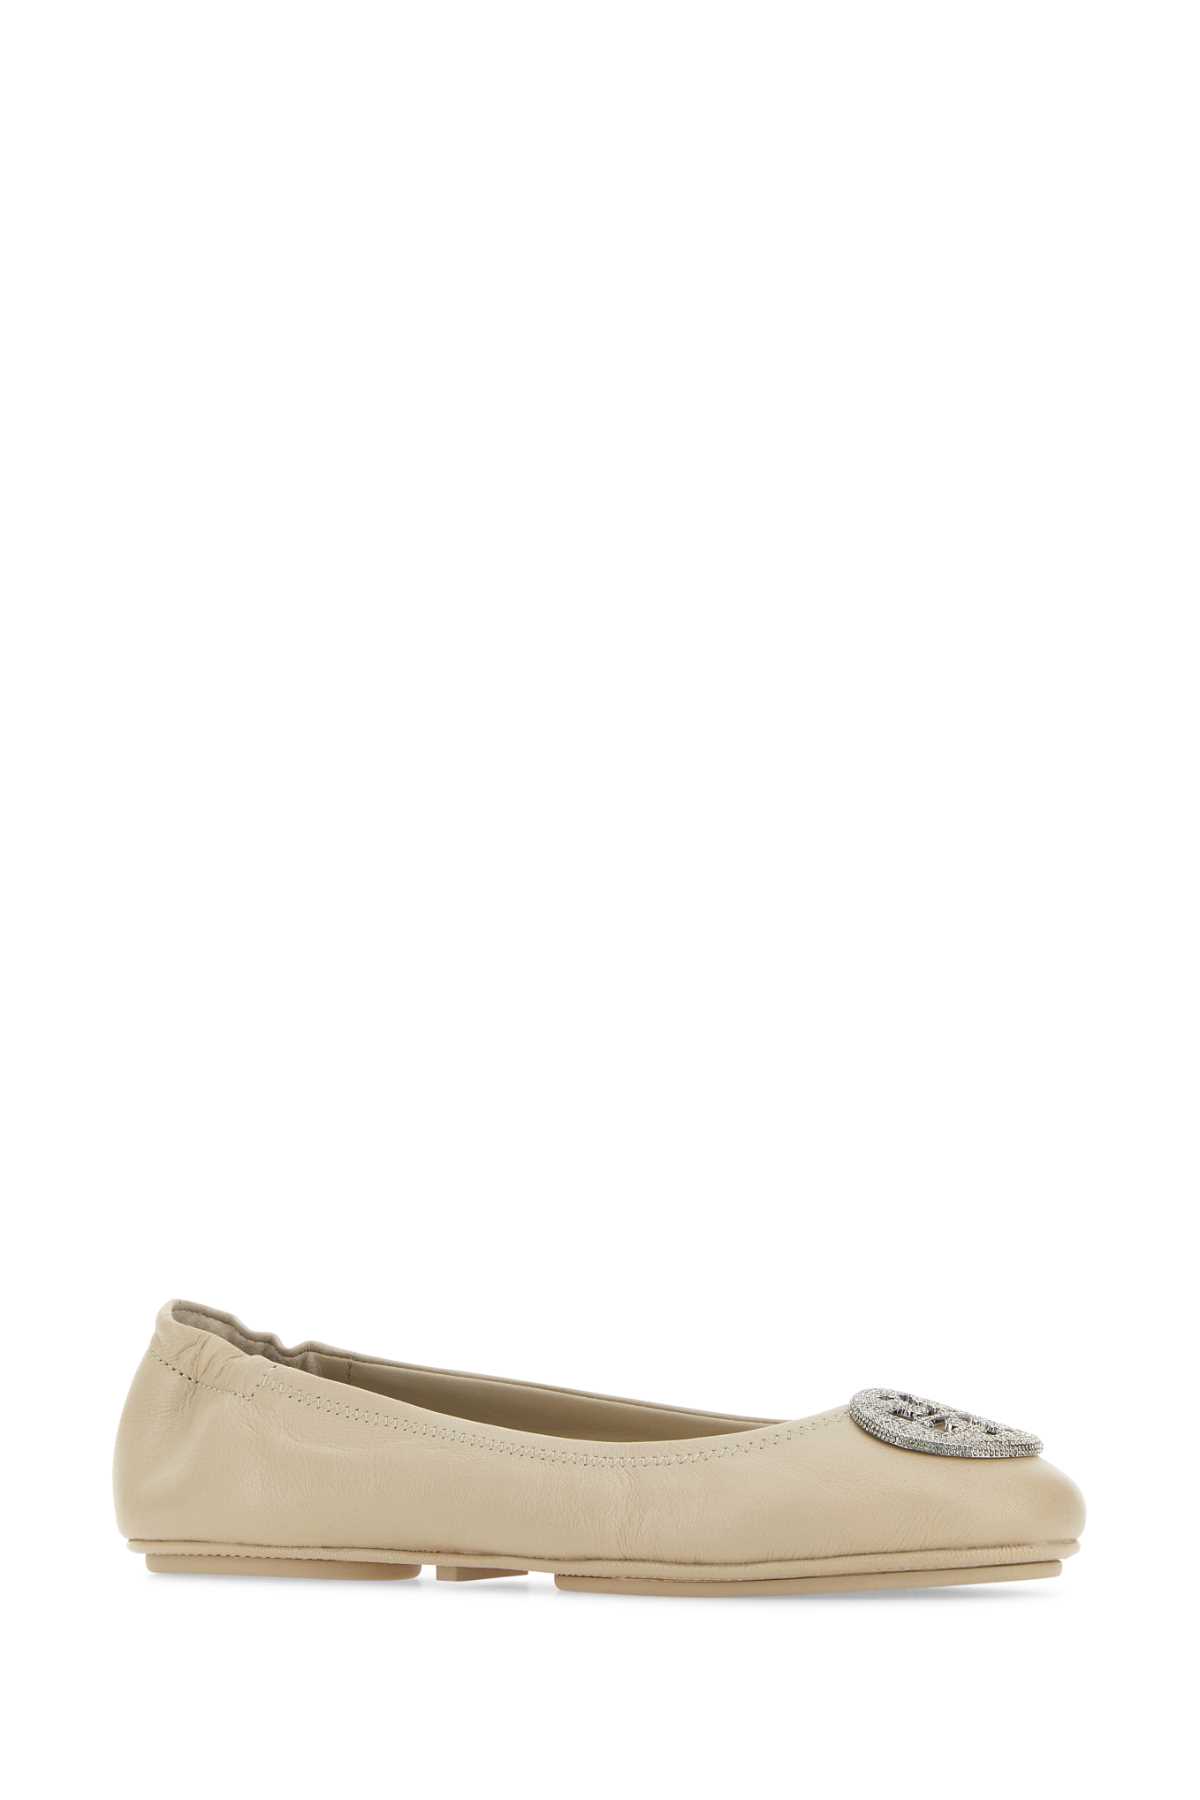 Tory Burch Sand Nappa Leather Minnie Ballerinas In Stonegraysilver